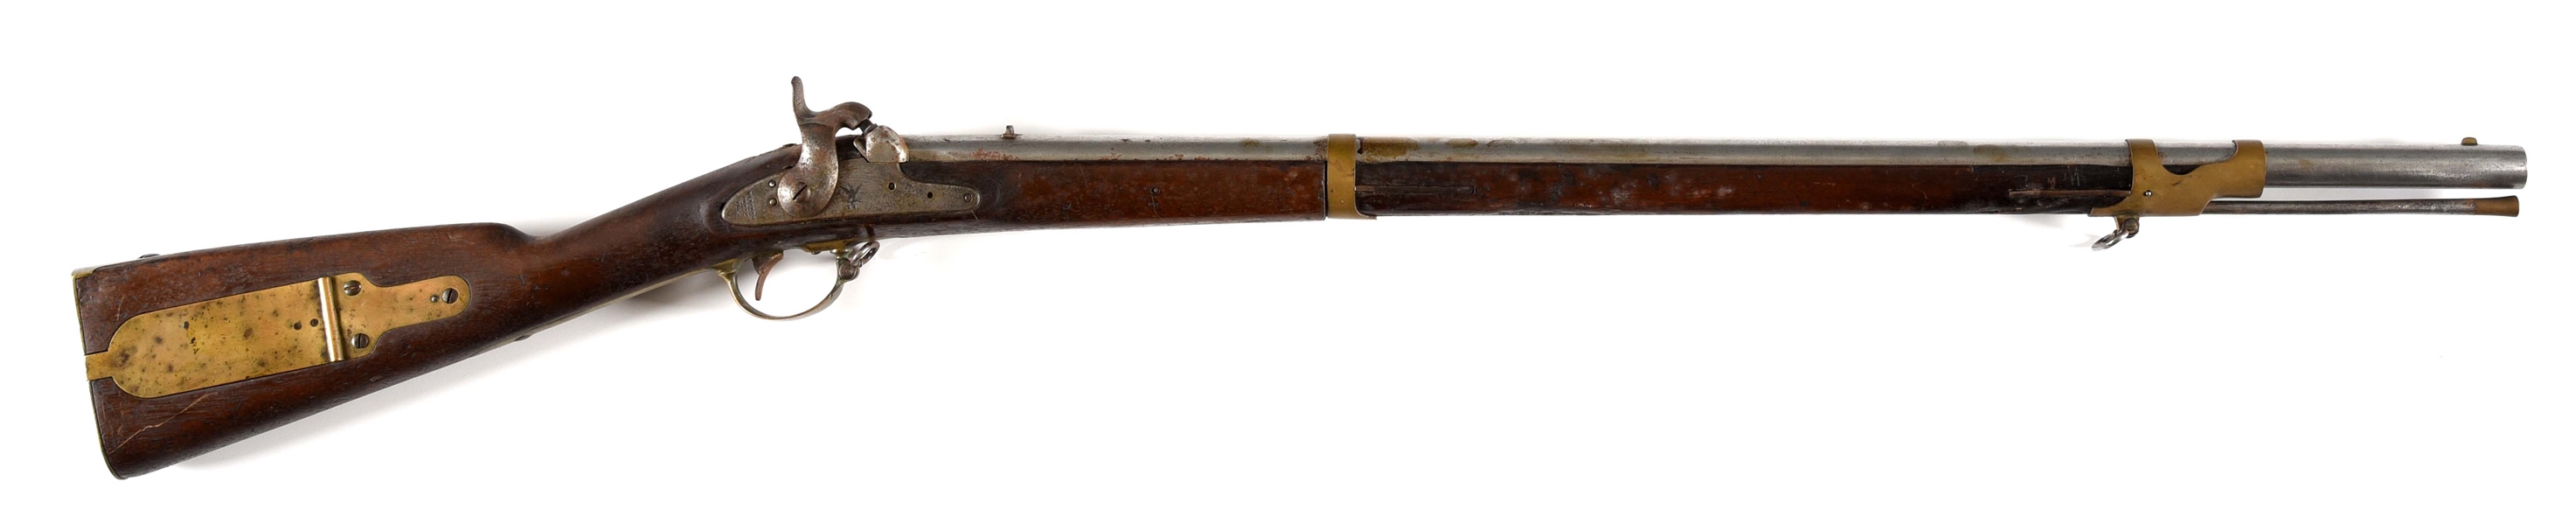 (A) HARPERS FERRY M1841 MISSISSIPPI RIFLE.